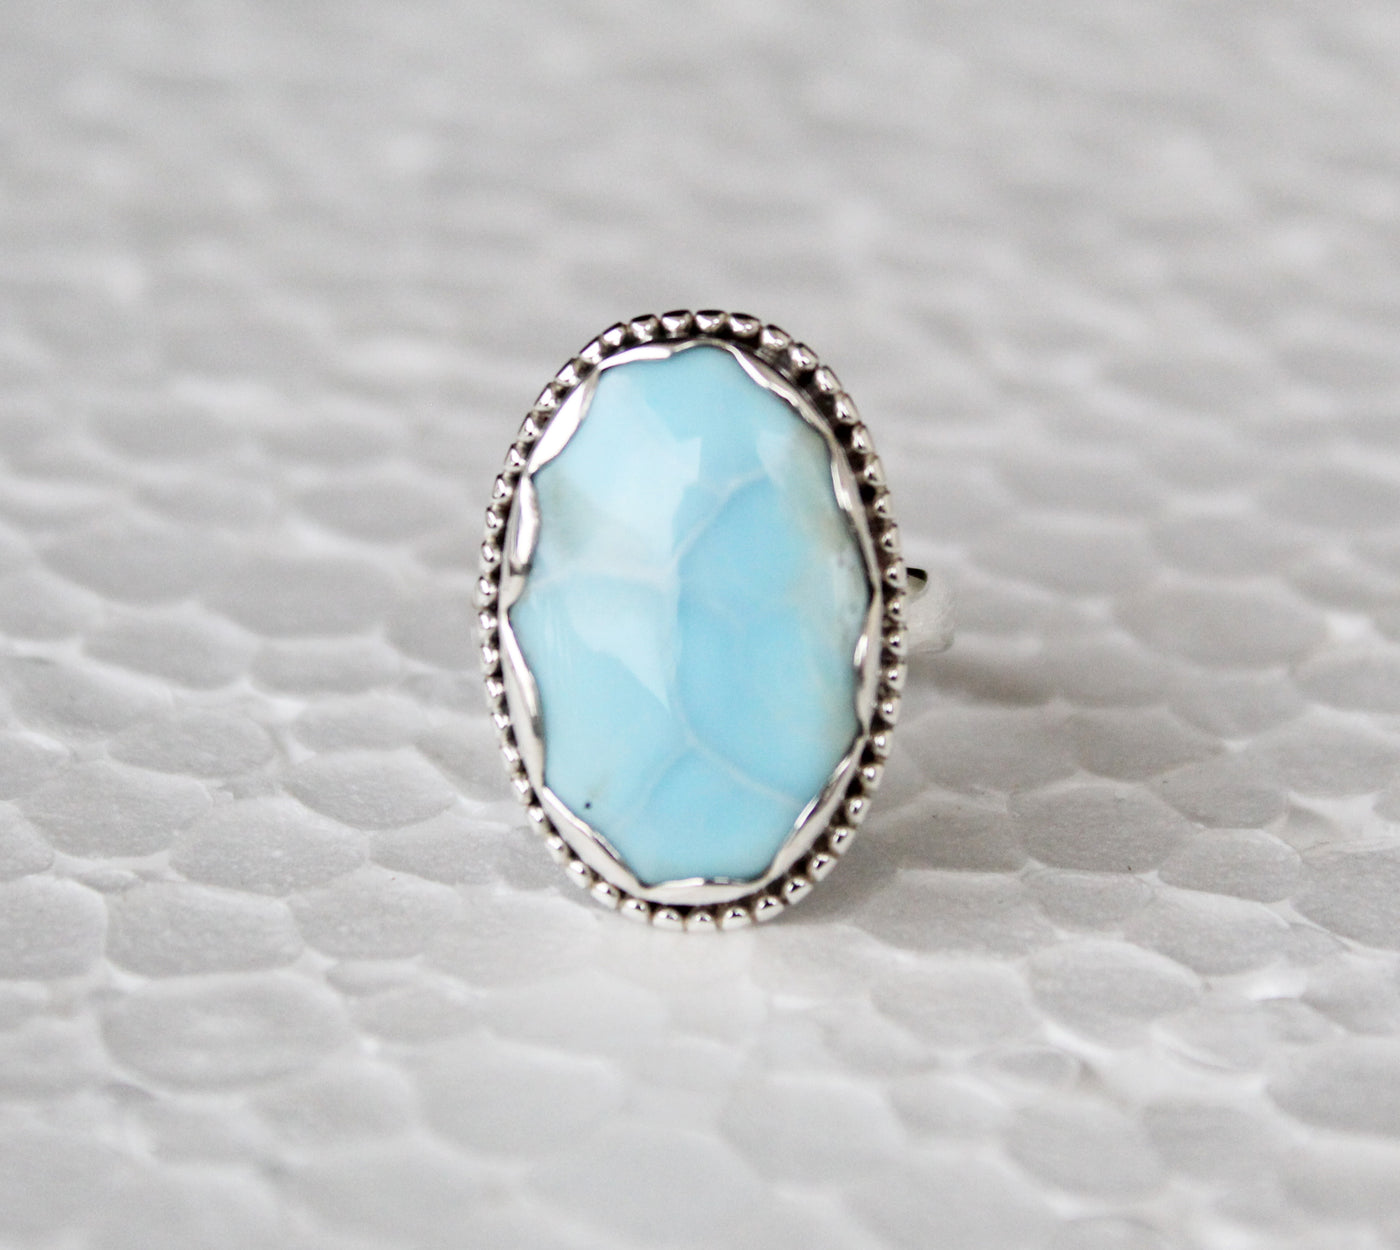 Beautiful Larimar Ring, Sterling Silver Ring, Gift for Wife, March birthstone, Sky Blue Gemstone, Blue Stone, Statement Ring, Large, Boho